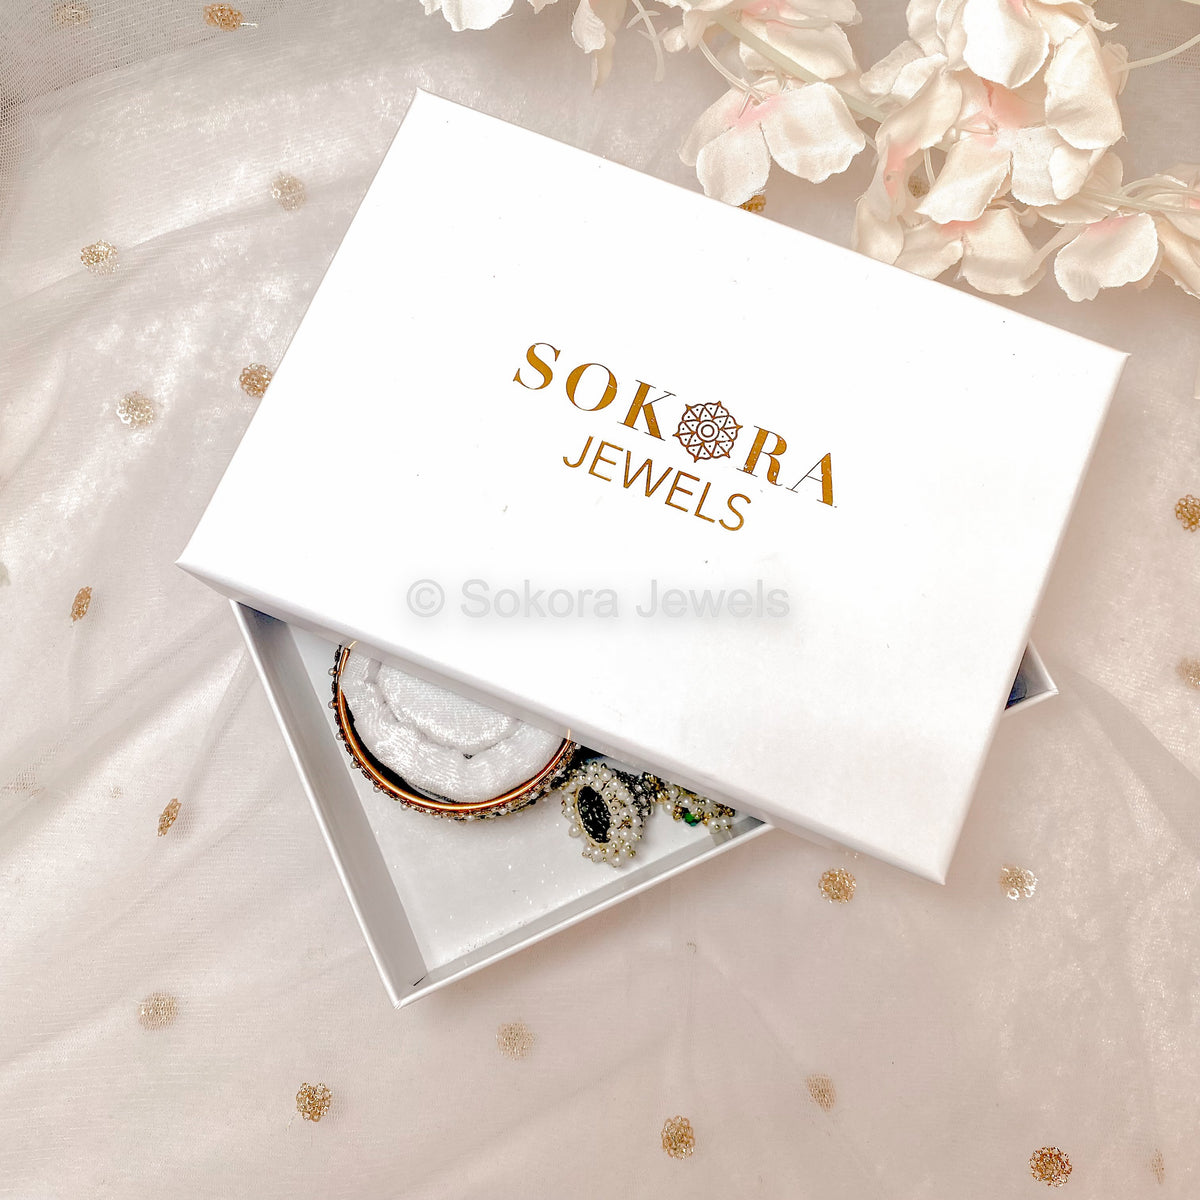 Gifts £10 and Under - SOKORA JEWELS